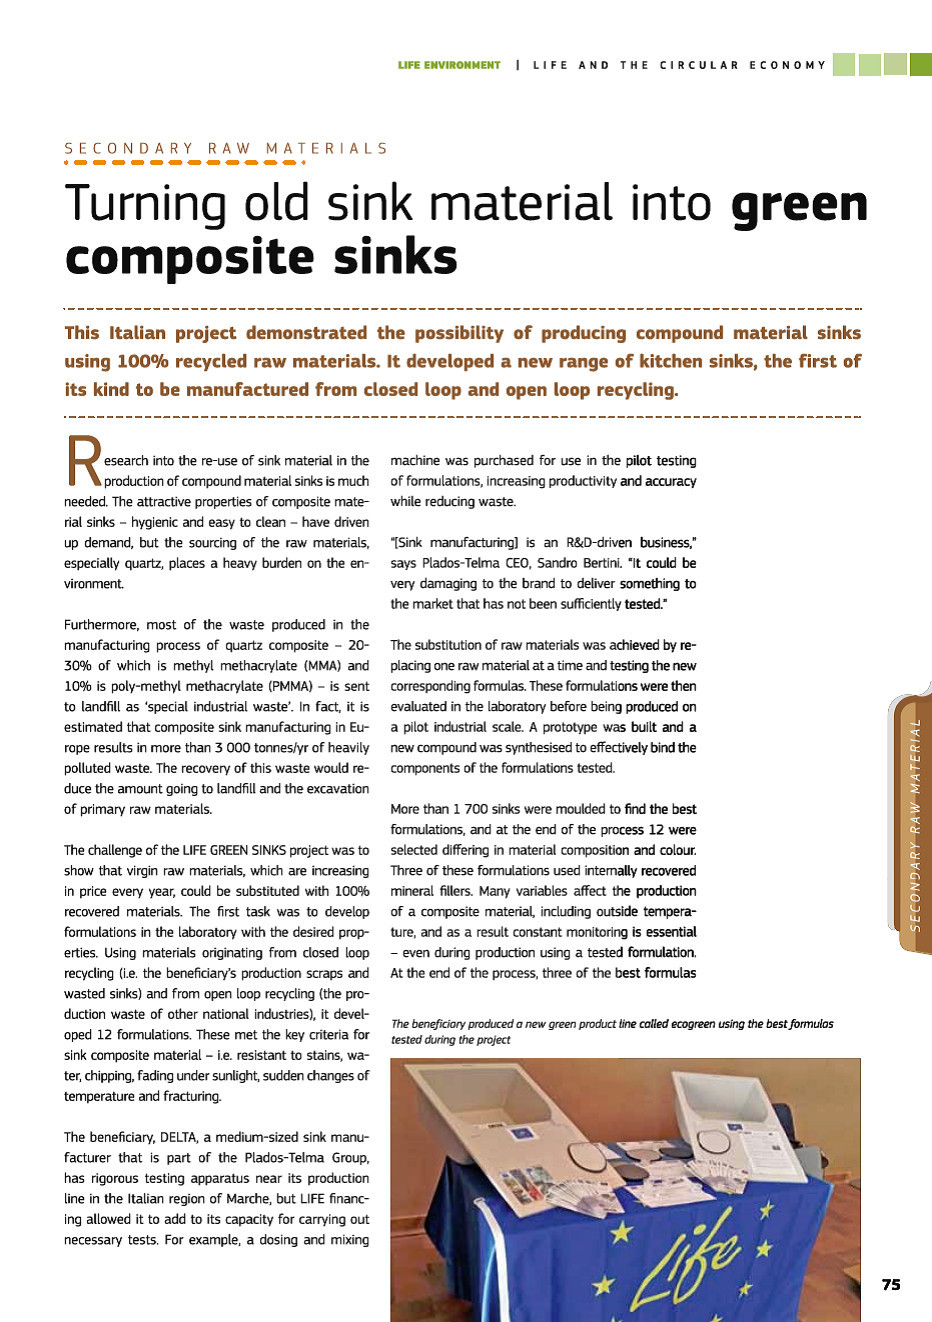 THE "GREEN SINKS" PROJECT IN THE EUROPEAN PUBLICATION "LIFE AND THE CIRCULAR ECONOMY" 2